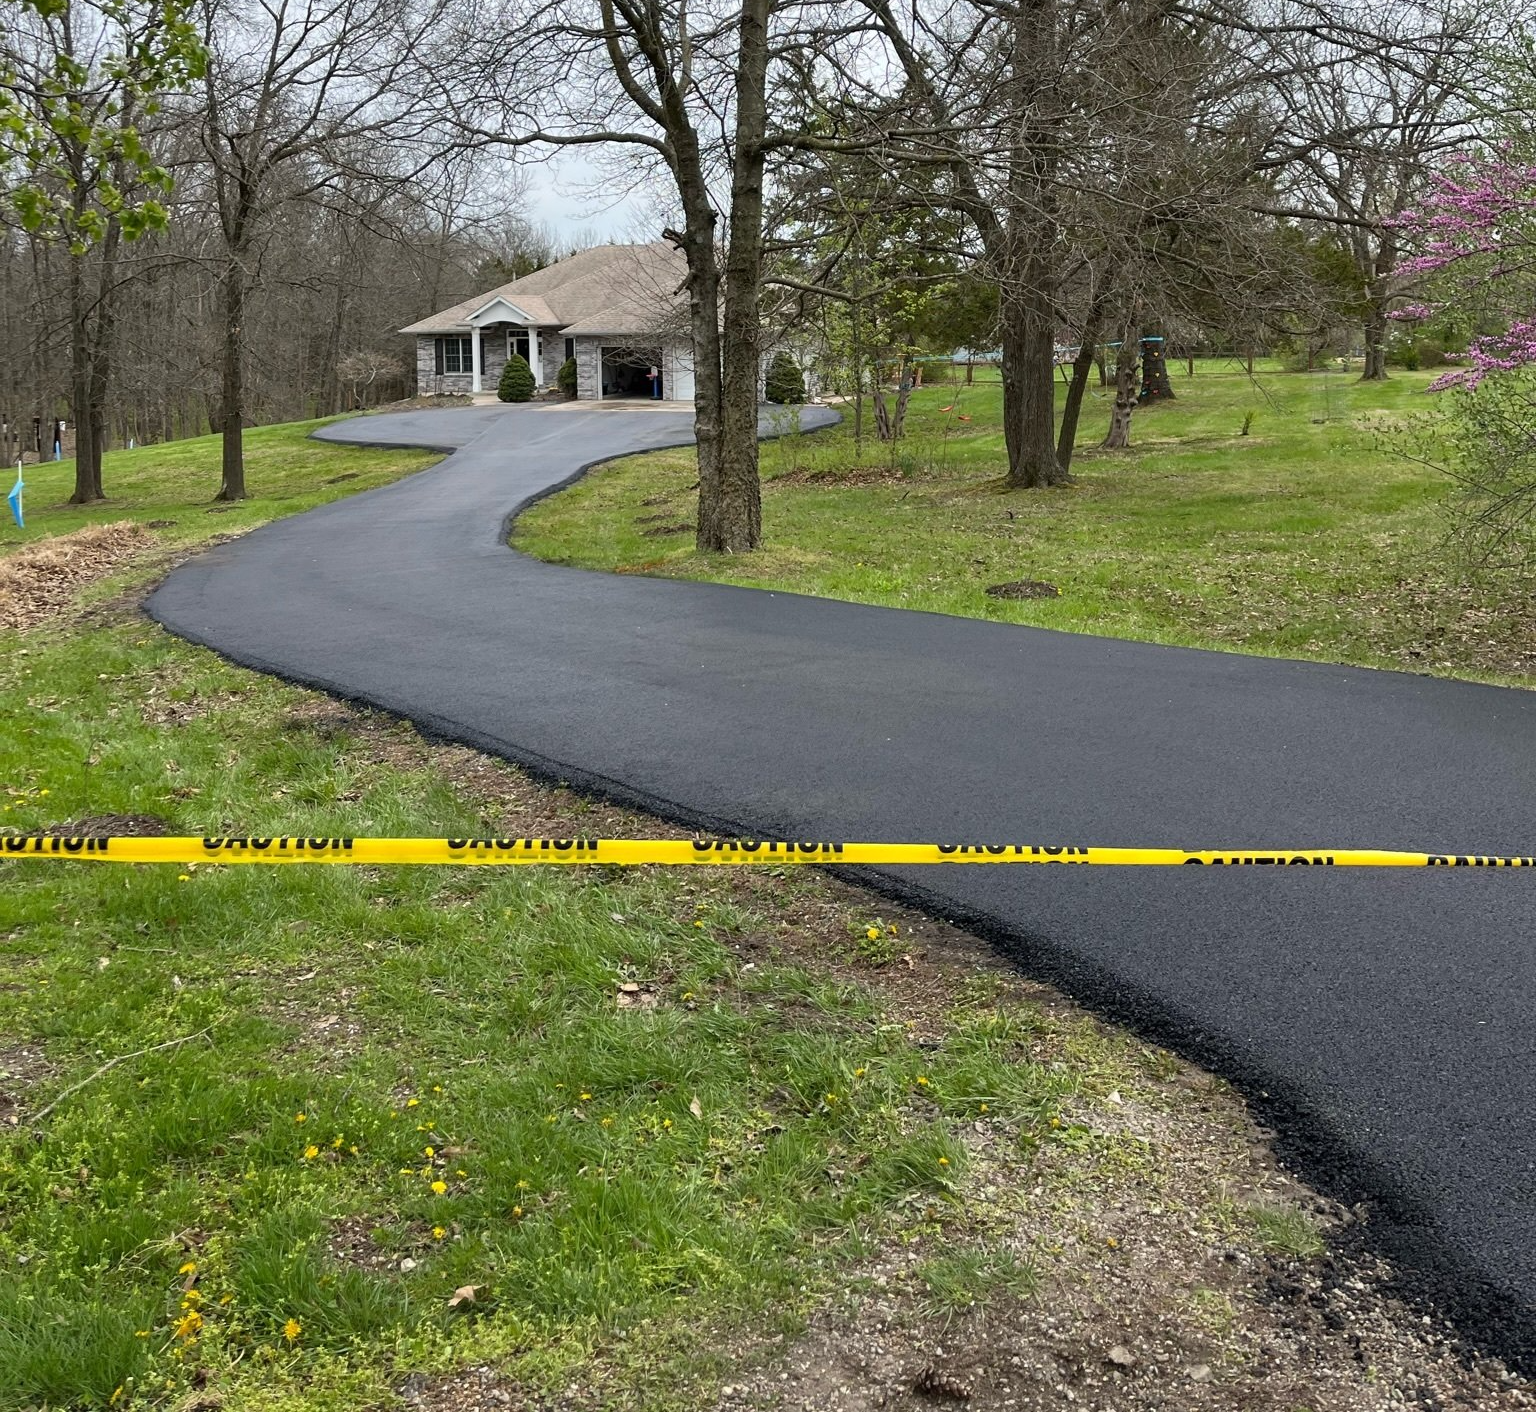 Don’t Let an Ugly Driveway Impact Your Centralia, MO Home’s Curb Appeal. Get Started With MoSEAL.